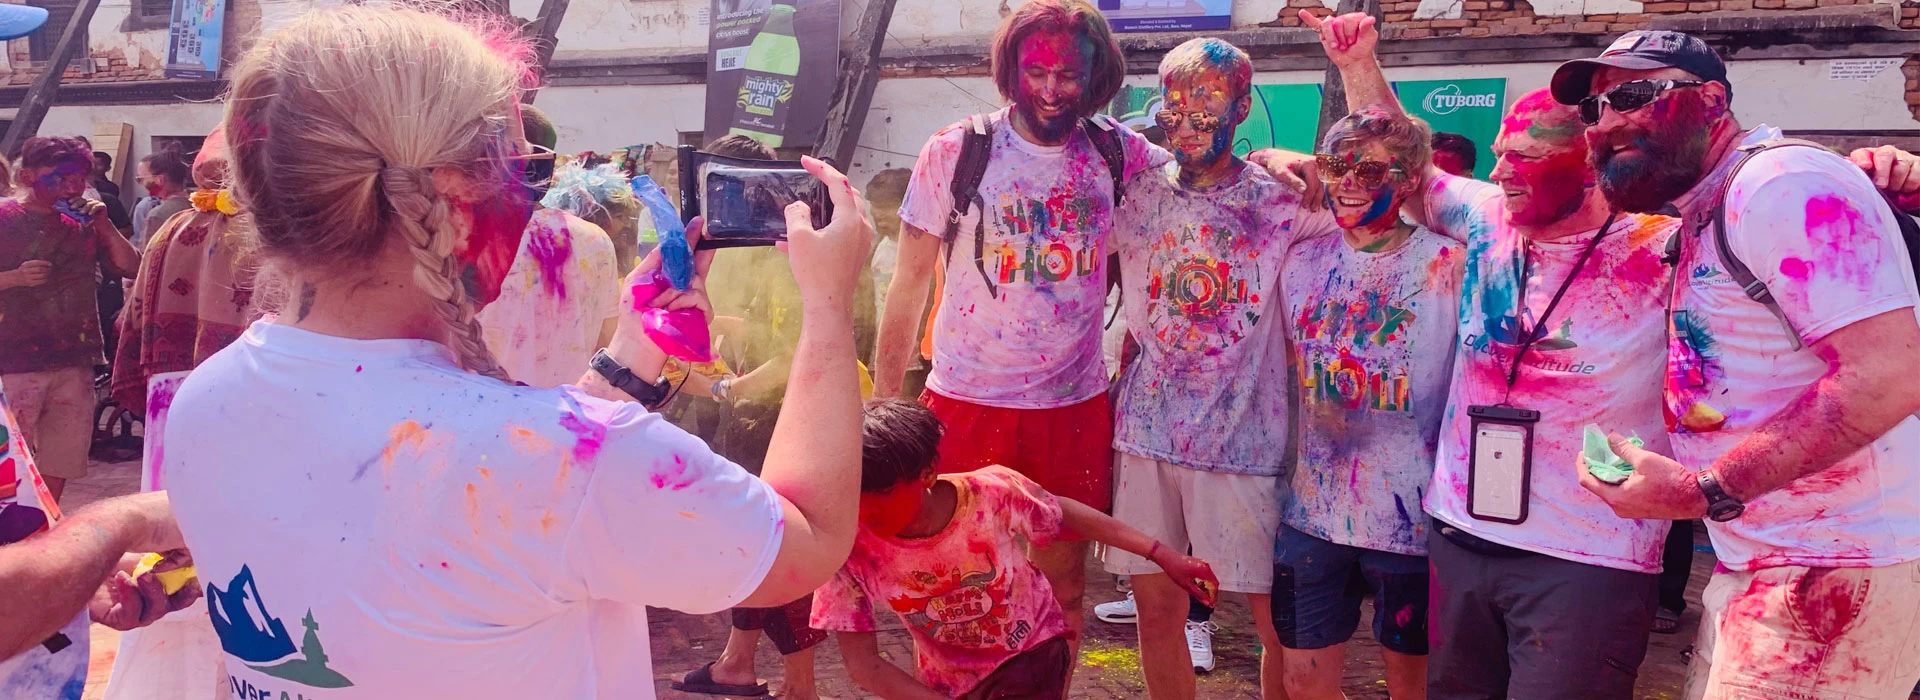 The Festival of Colours, the Festival of Spring, and the Festival of Love